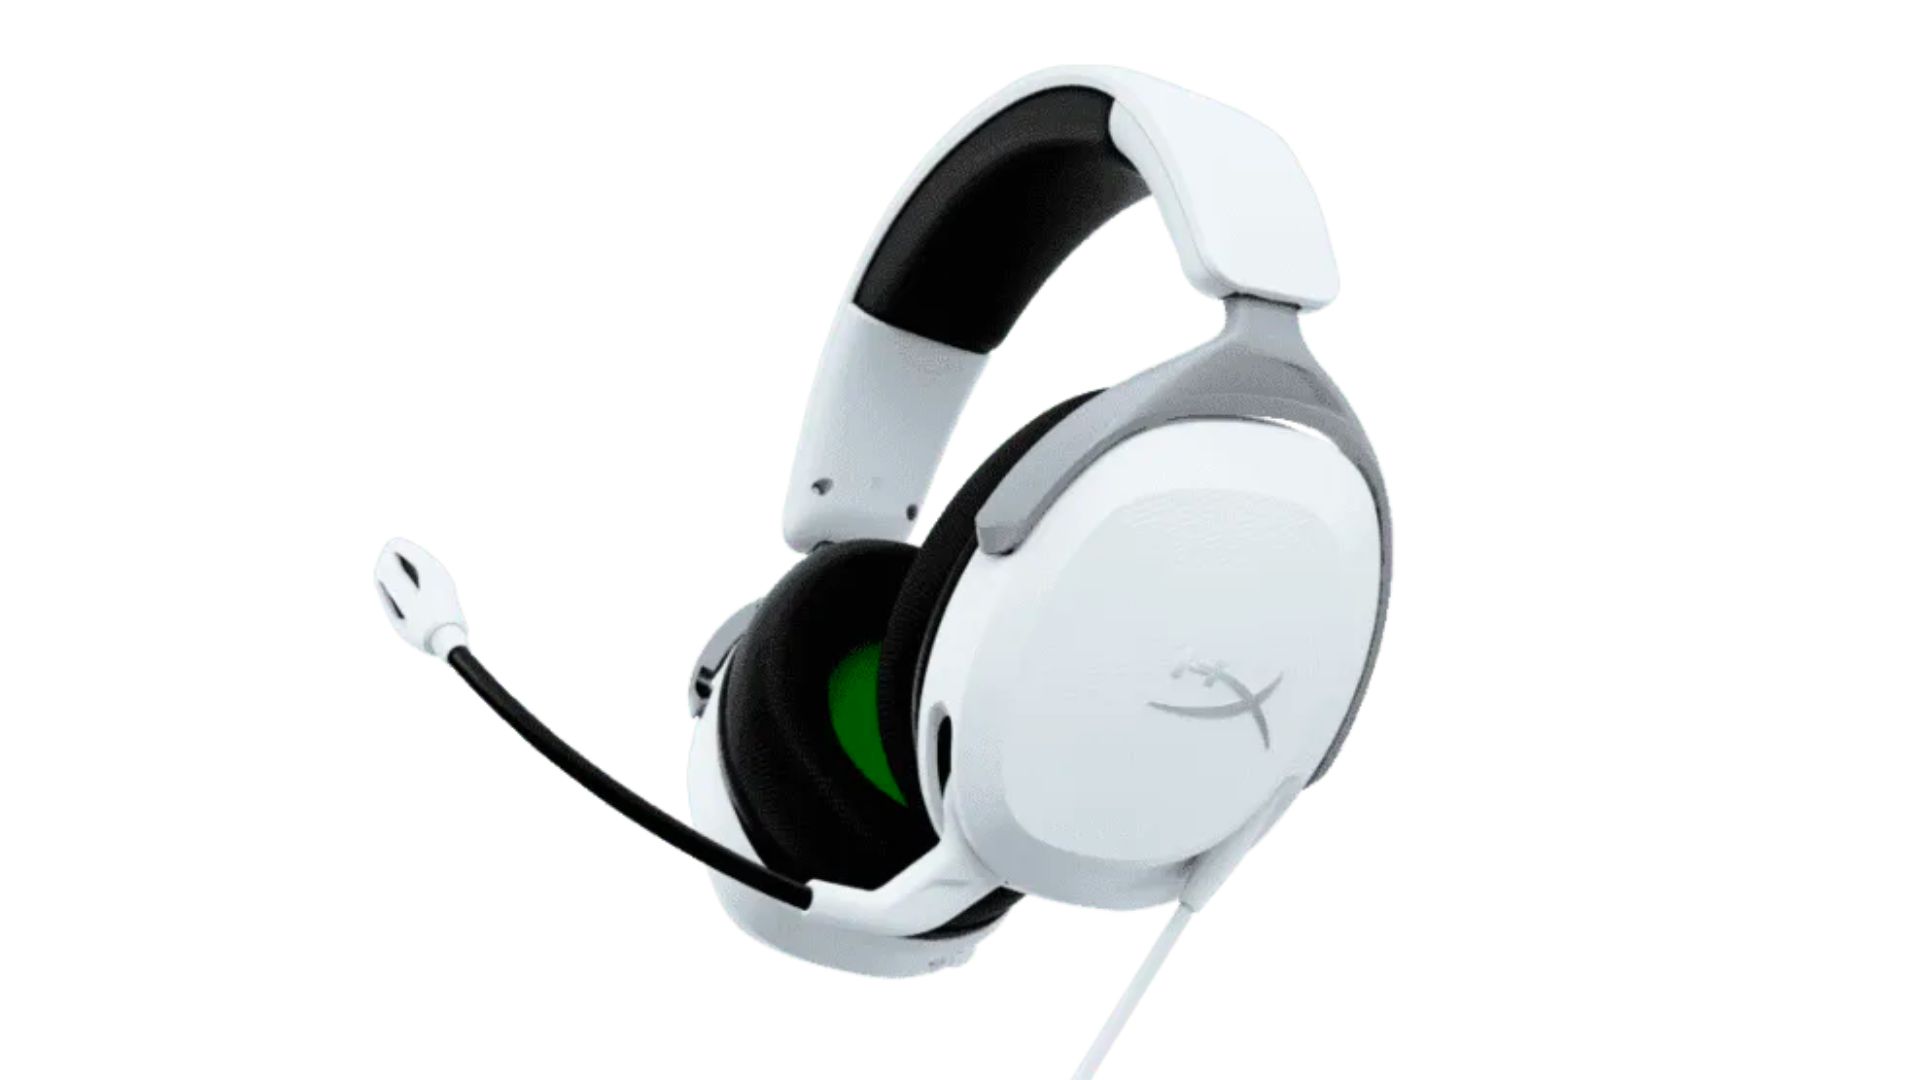 Budget gaming PC accessories: Headsets